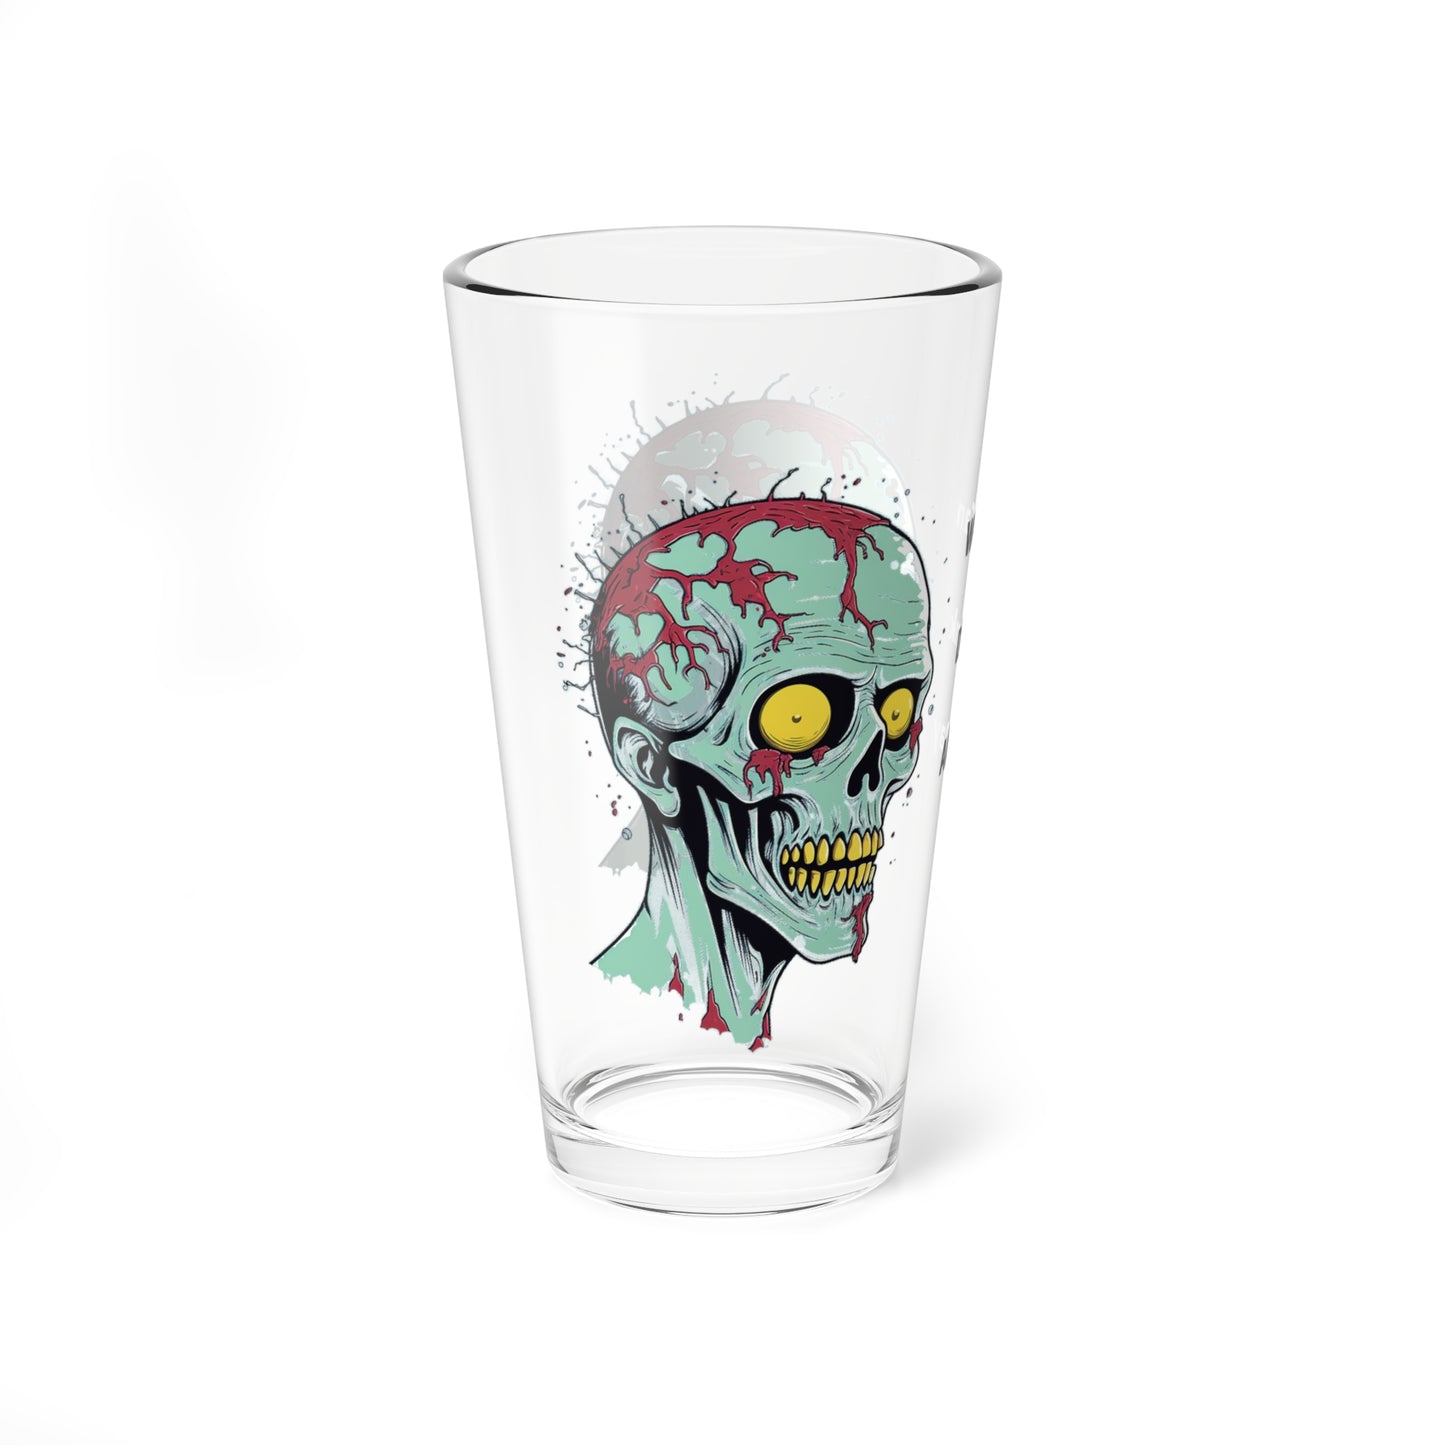 Skull Mixing Glass, Zombie Drinking Glass, Skull Beer Glass, We can Drink All Day Glass, St Patrick's Day Gift, Gift for Drinker